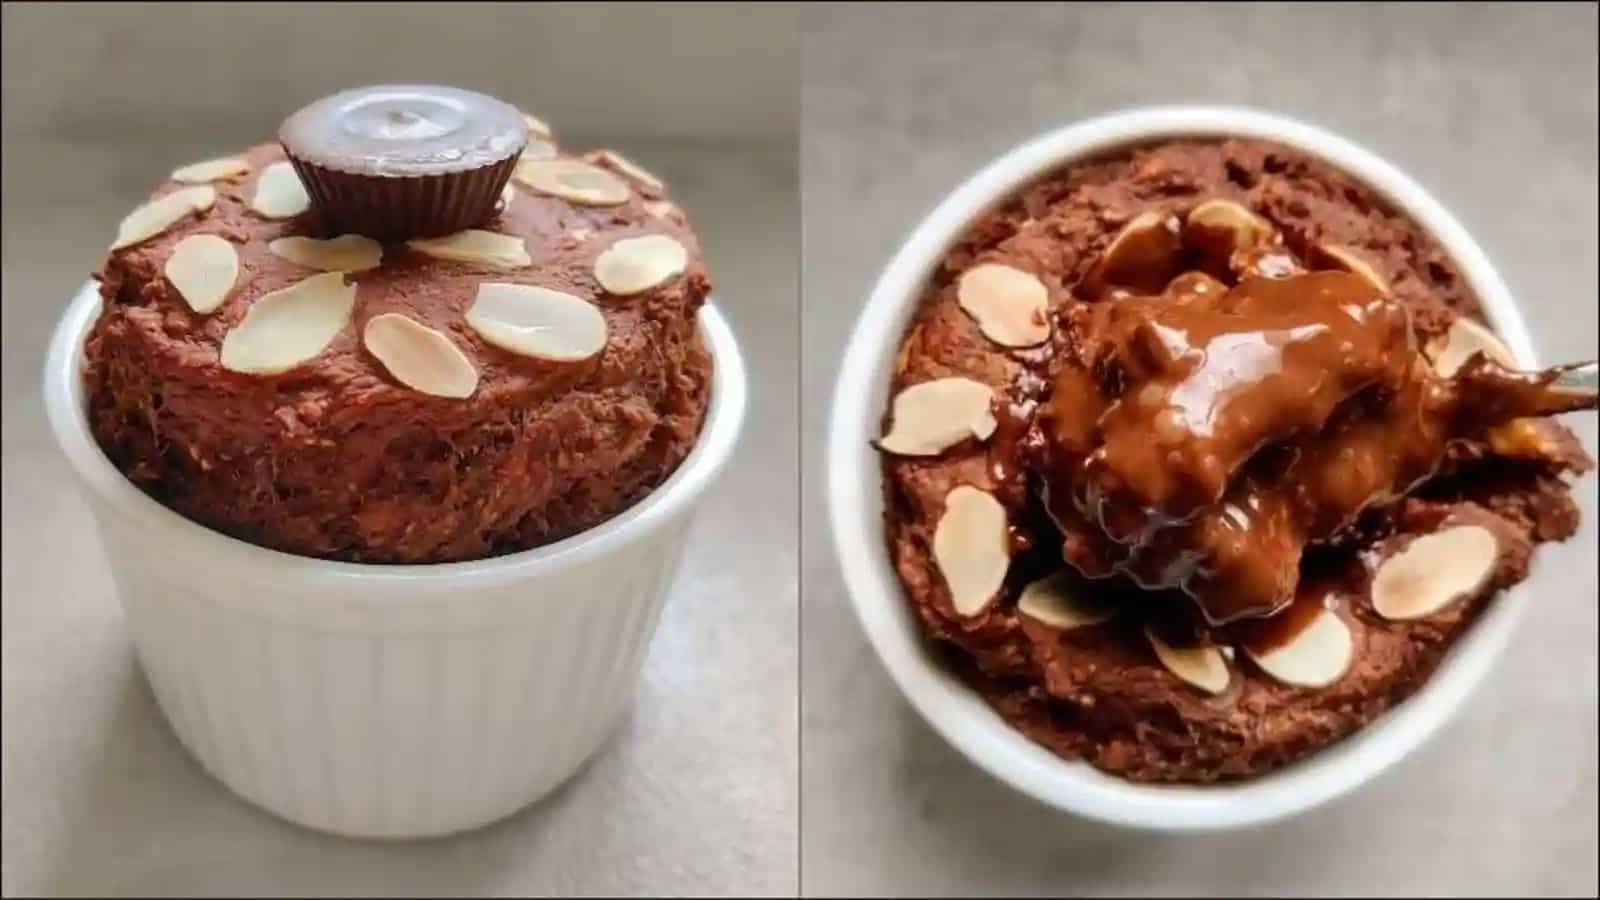 Recipe: Say ‘yes’ to healthy snacking with Almond Nuttercup Baked Oats